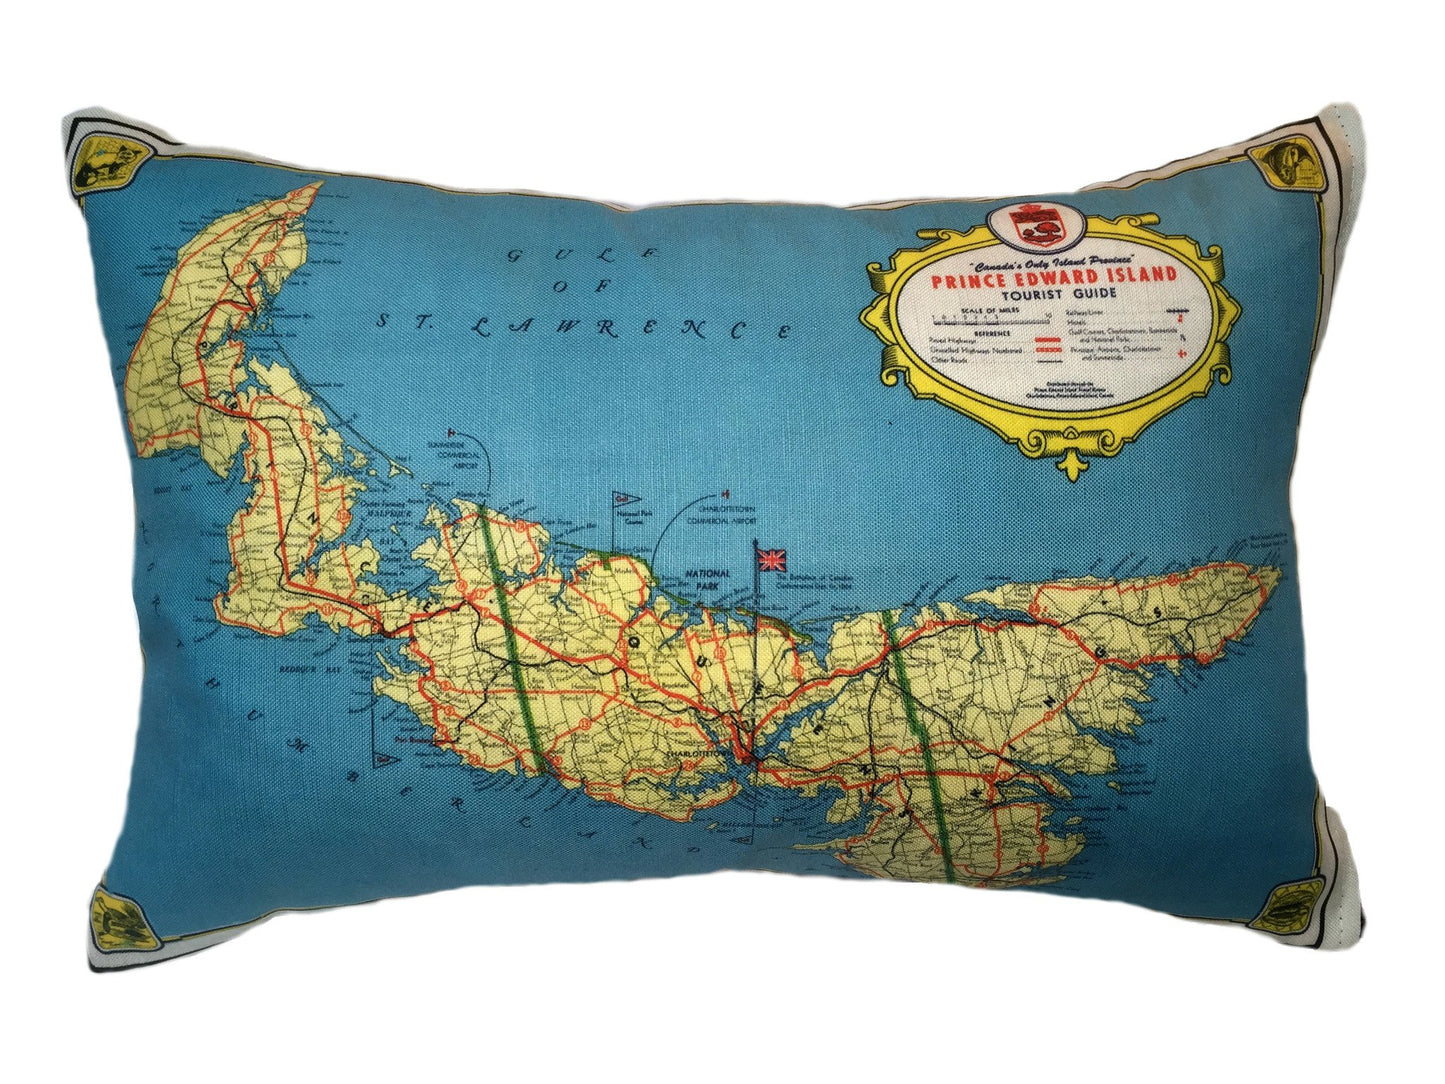 Made in Canada linen pillow case with hand printed vintage road map of Prince Edward Island and the Gulf of St Lawrence in eastern Atlantic Canada.